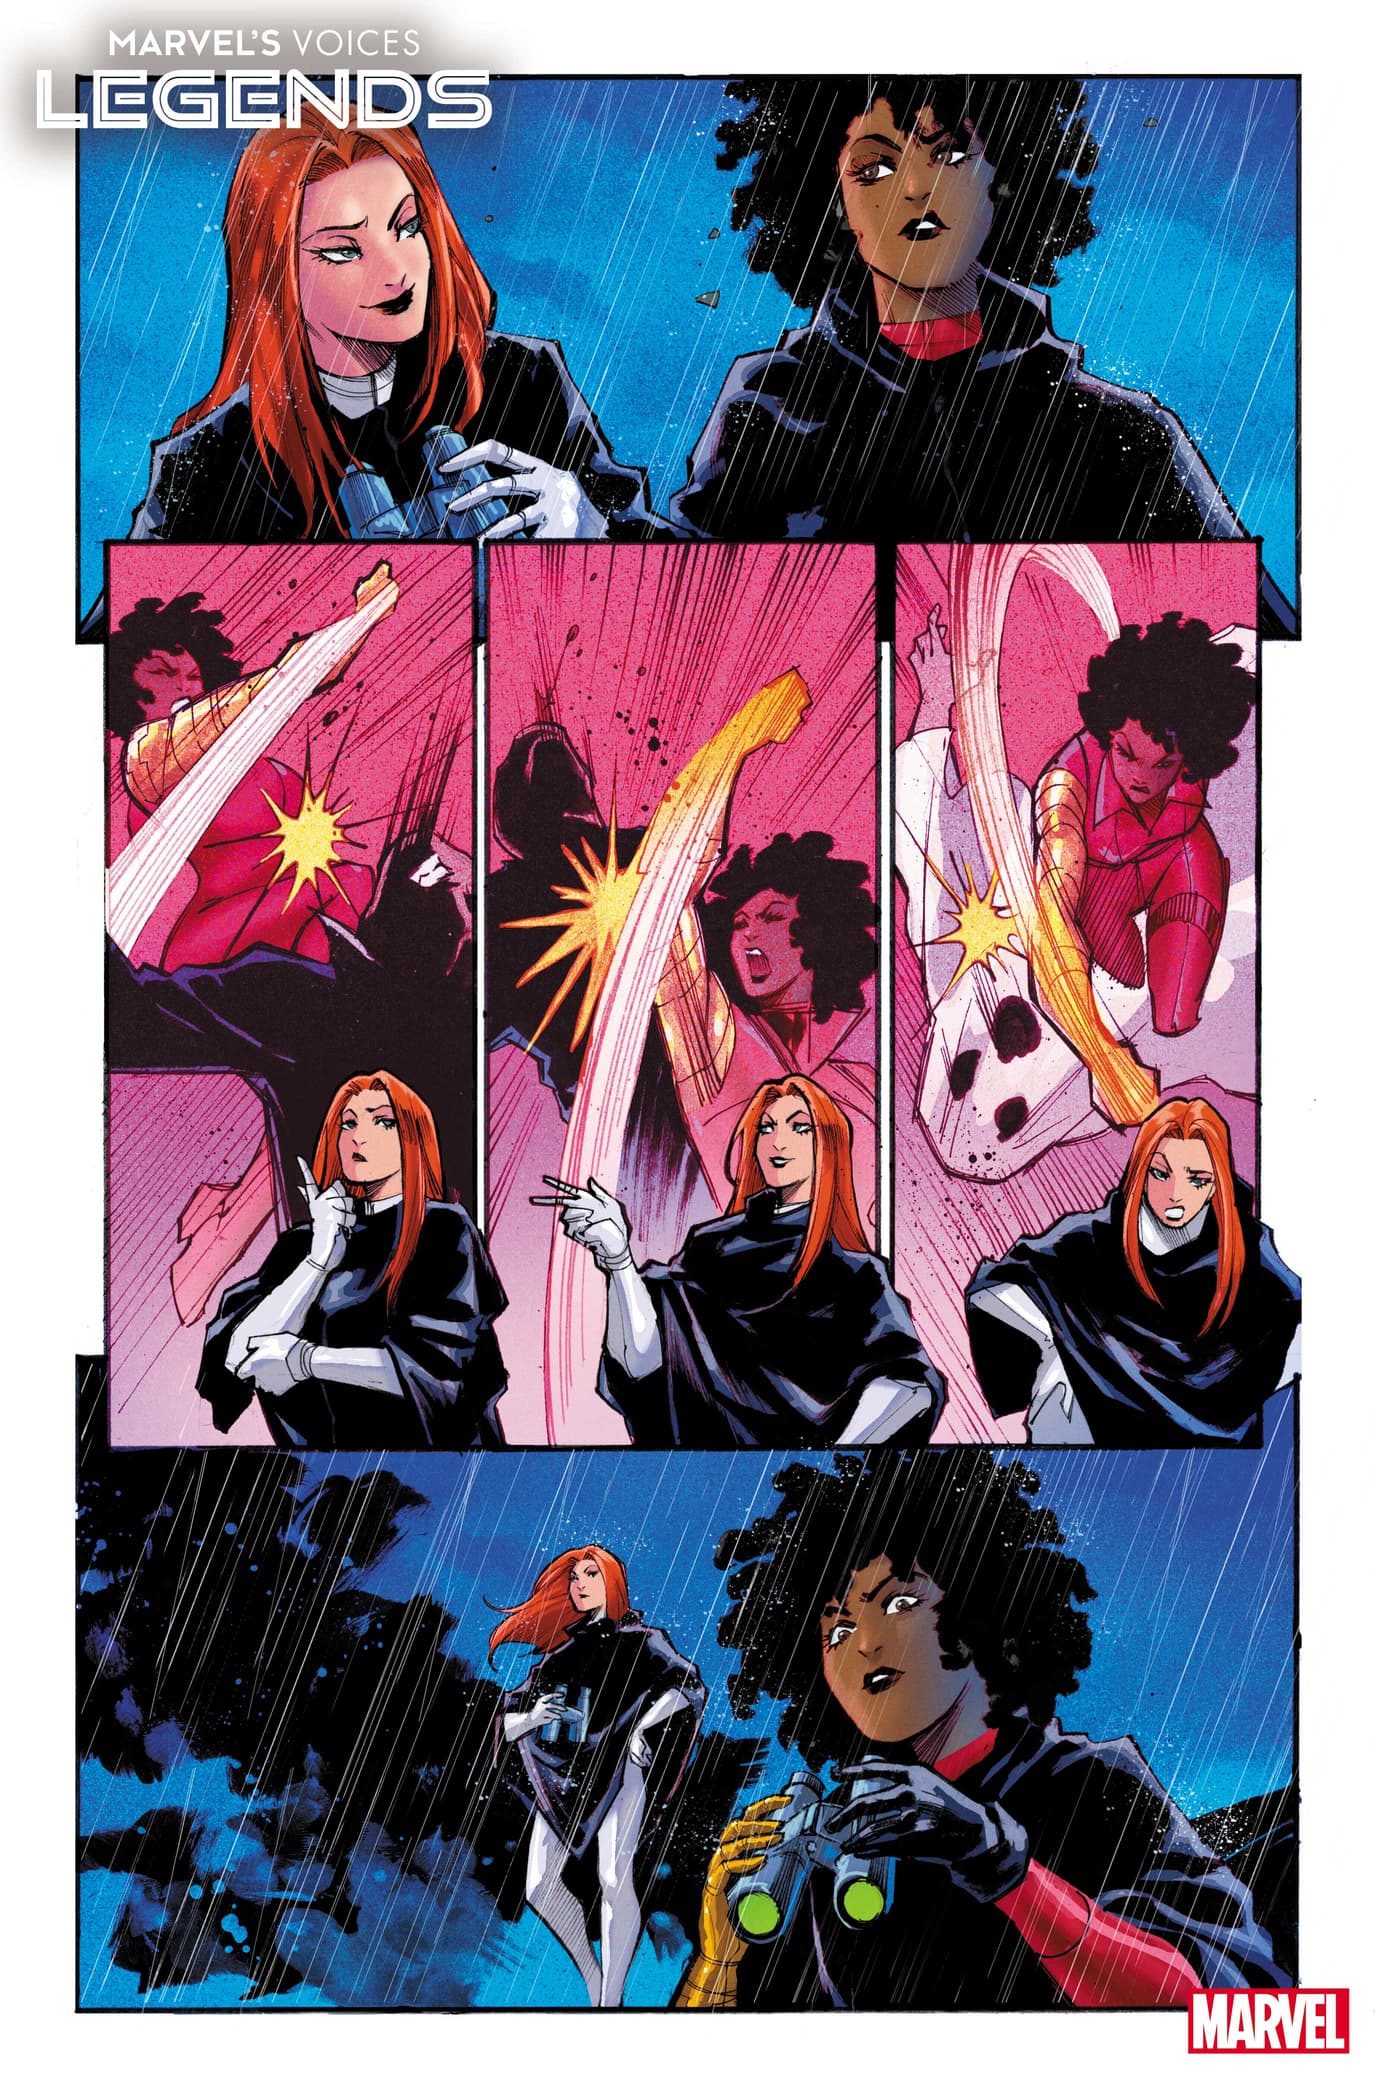 MARVEL’S VOICES: LEGENDS #1: 'Do You Remember When?' artwork by Karen Darboe